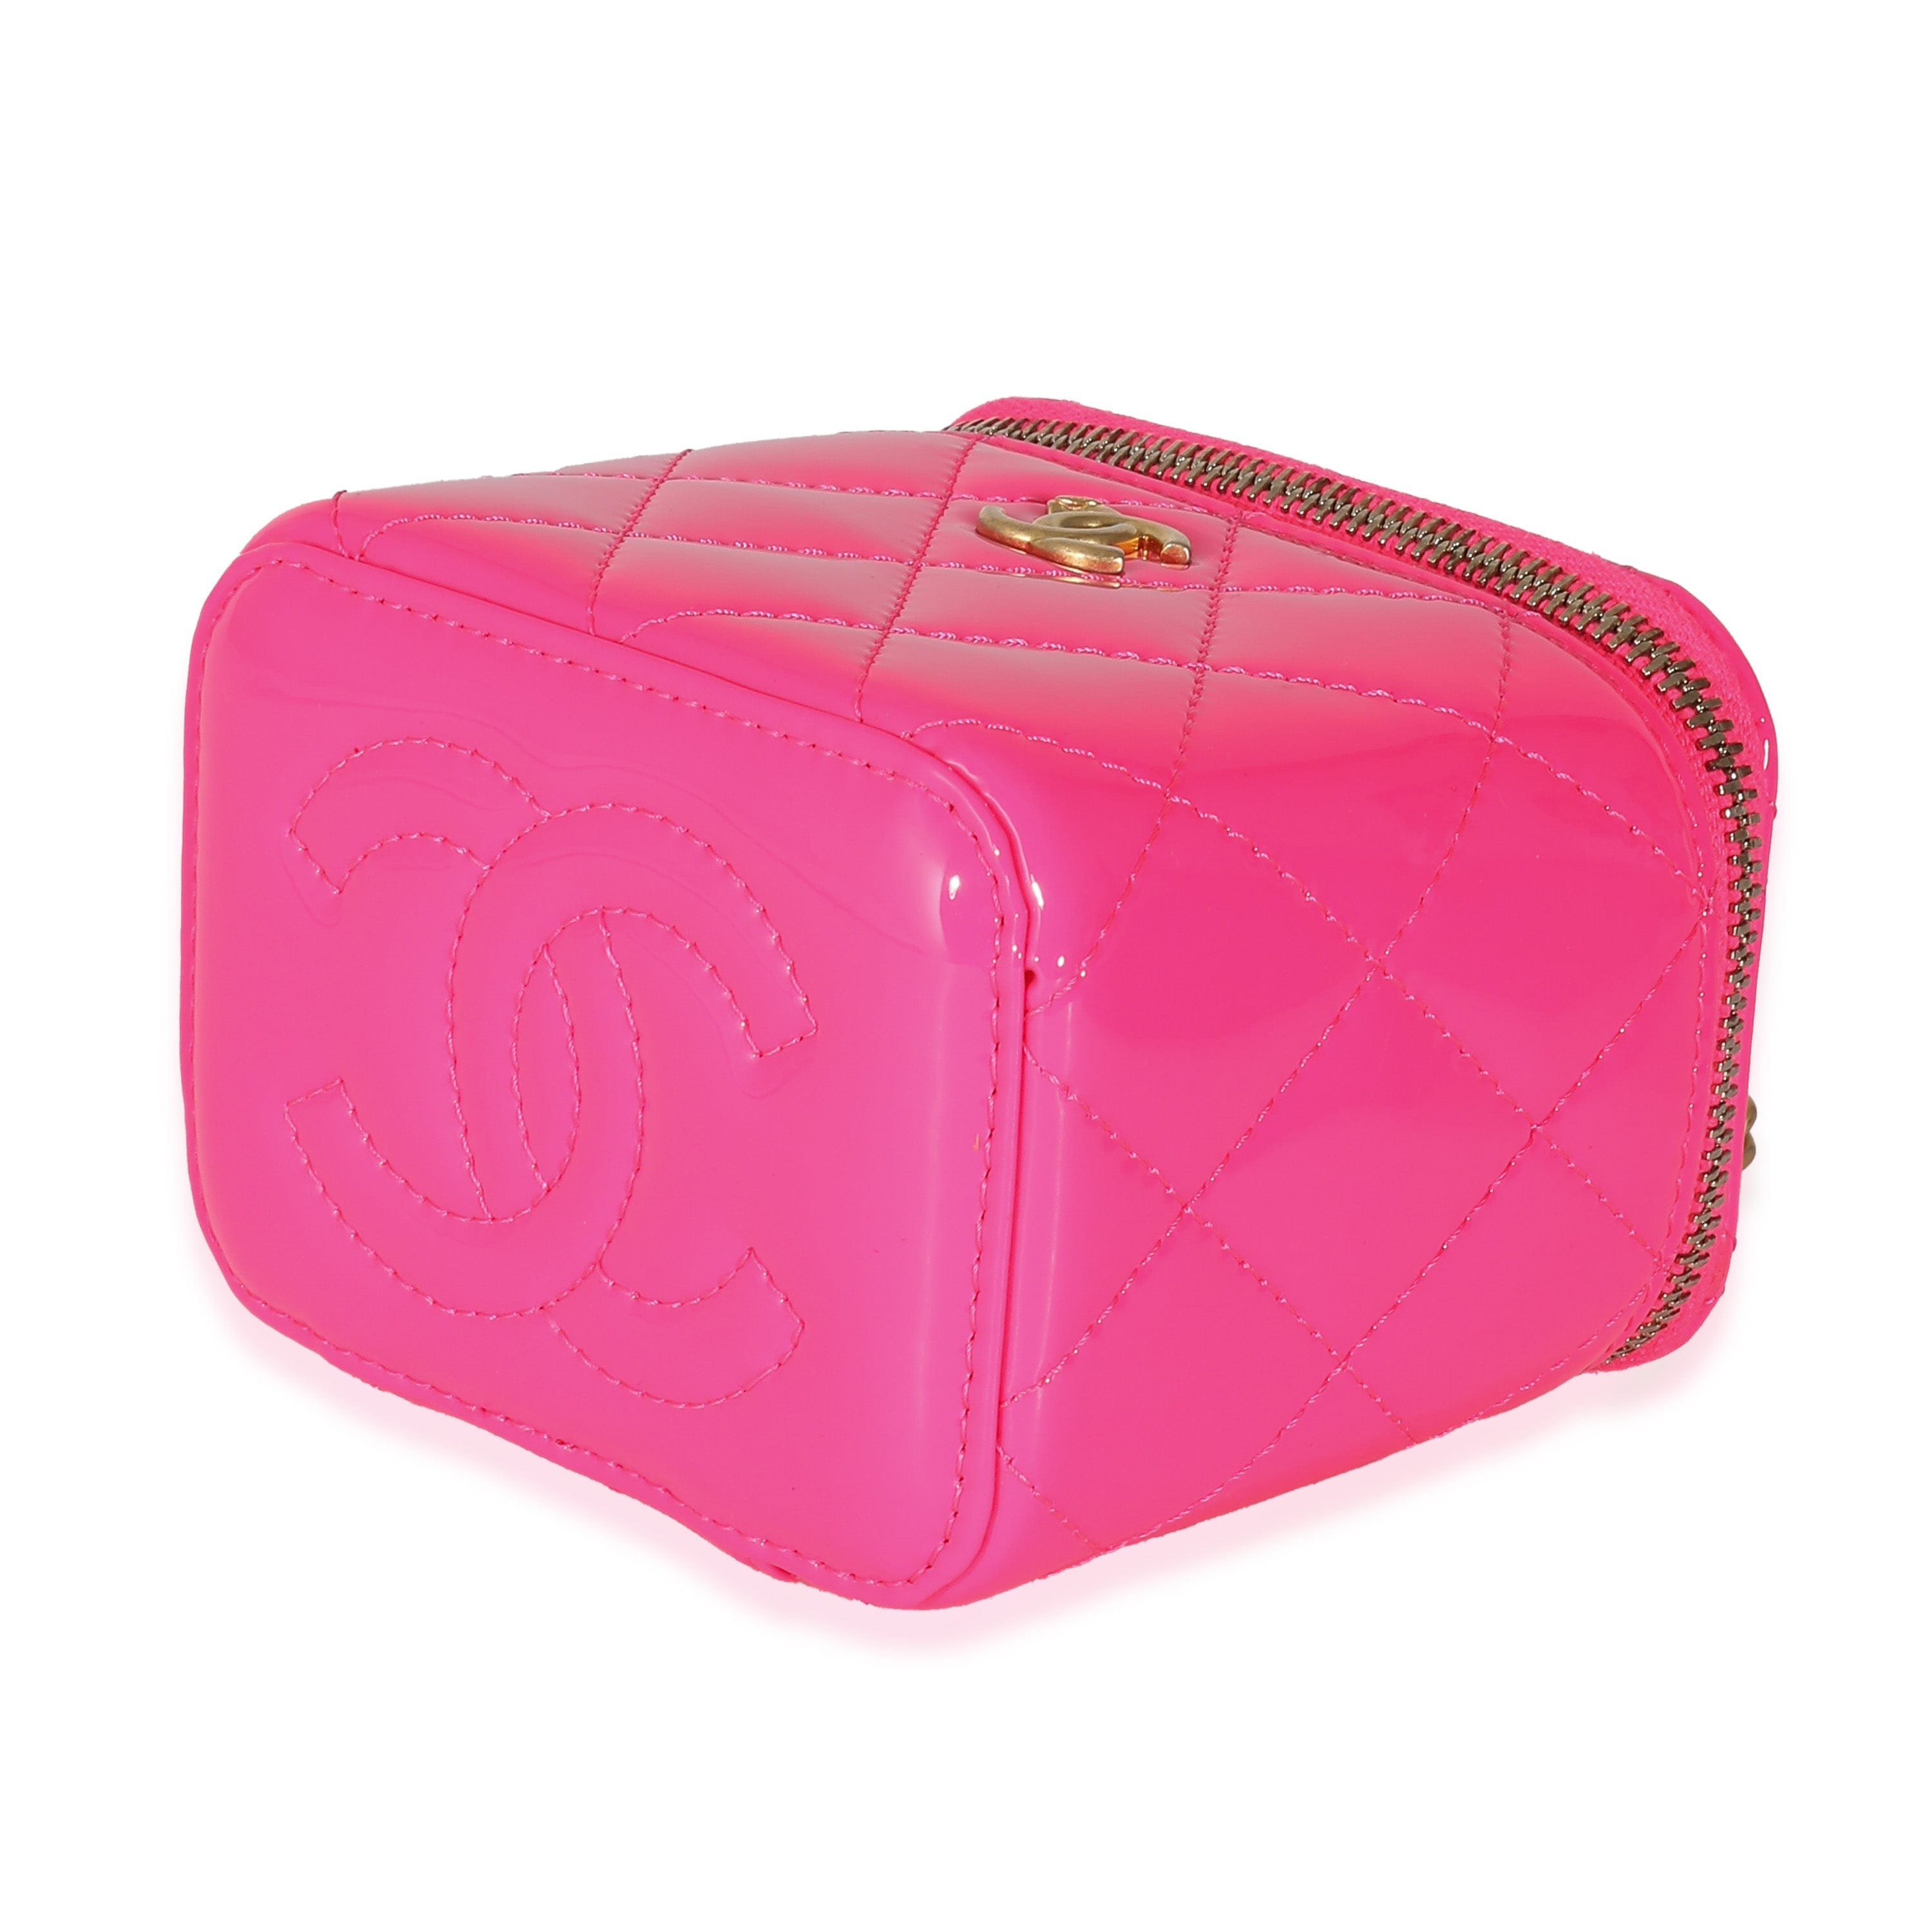 Chanel Chanel Neon Pink Quilted Patent Pearl Crush Mini Vanity Case